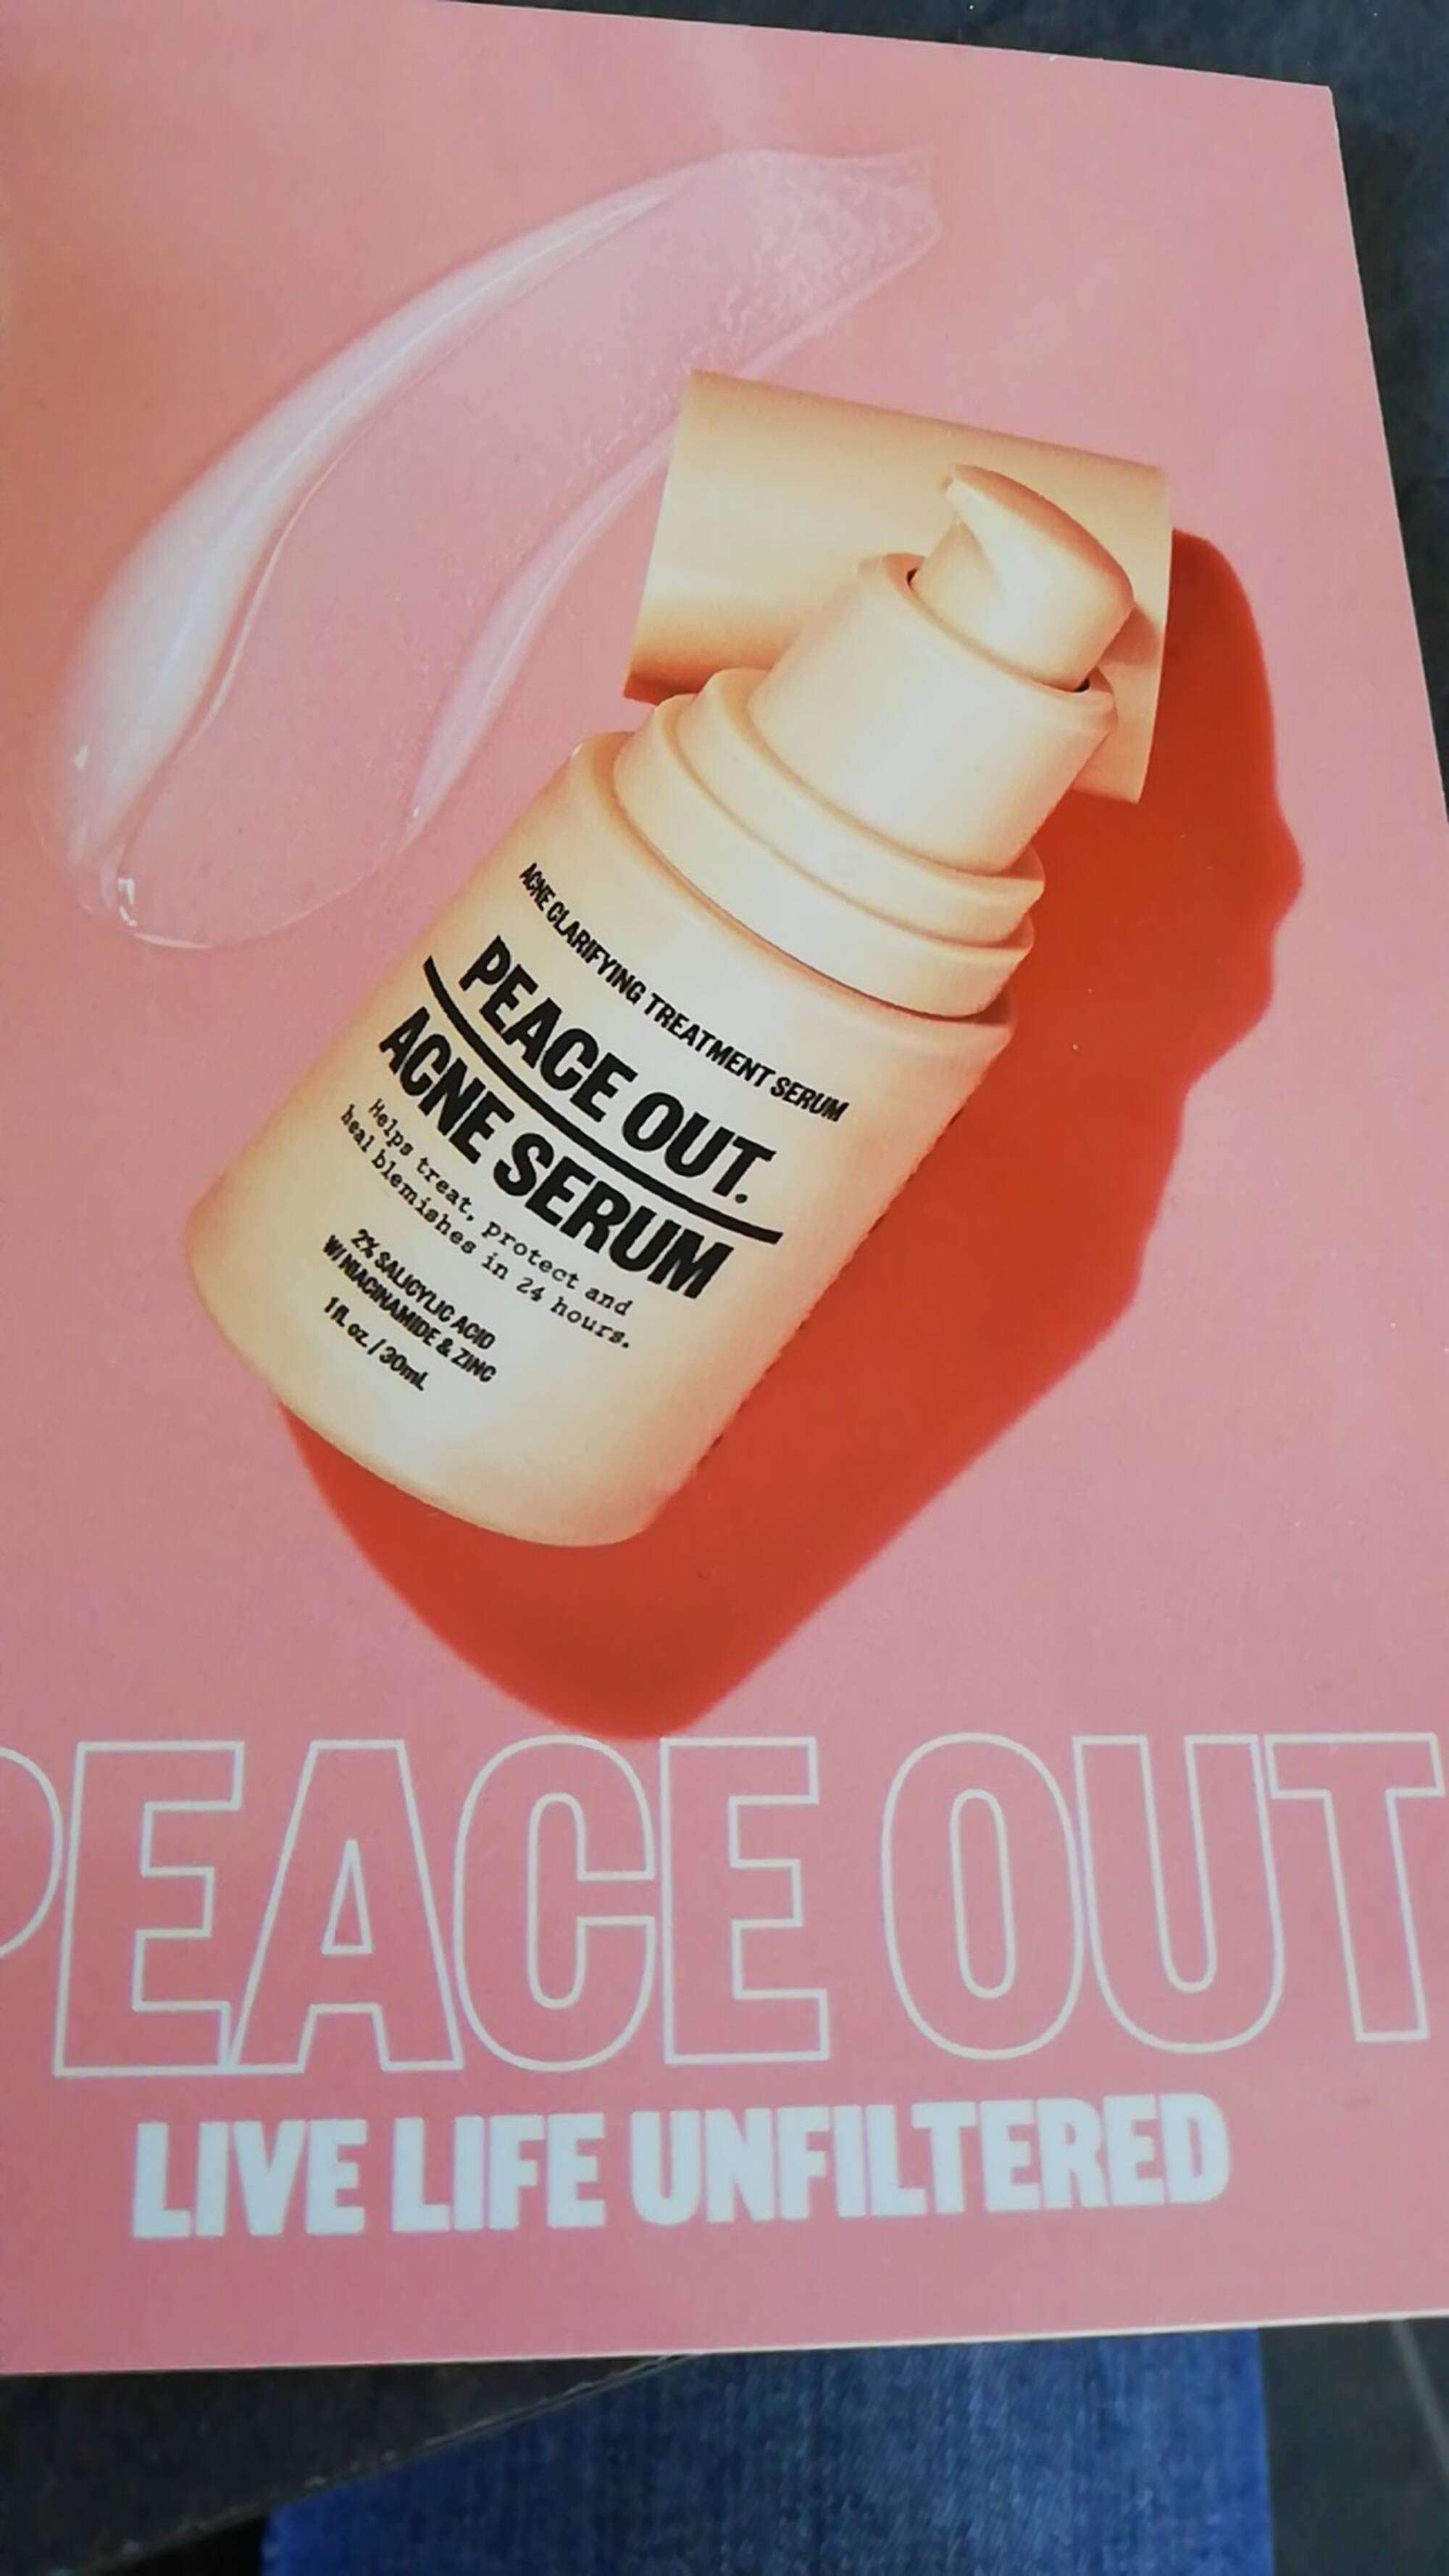 PEACE OUT - Peace out - Acne serum